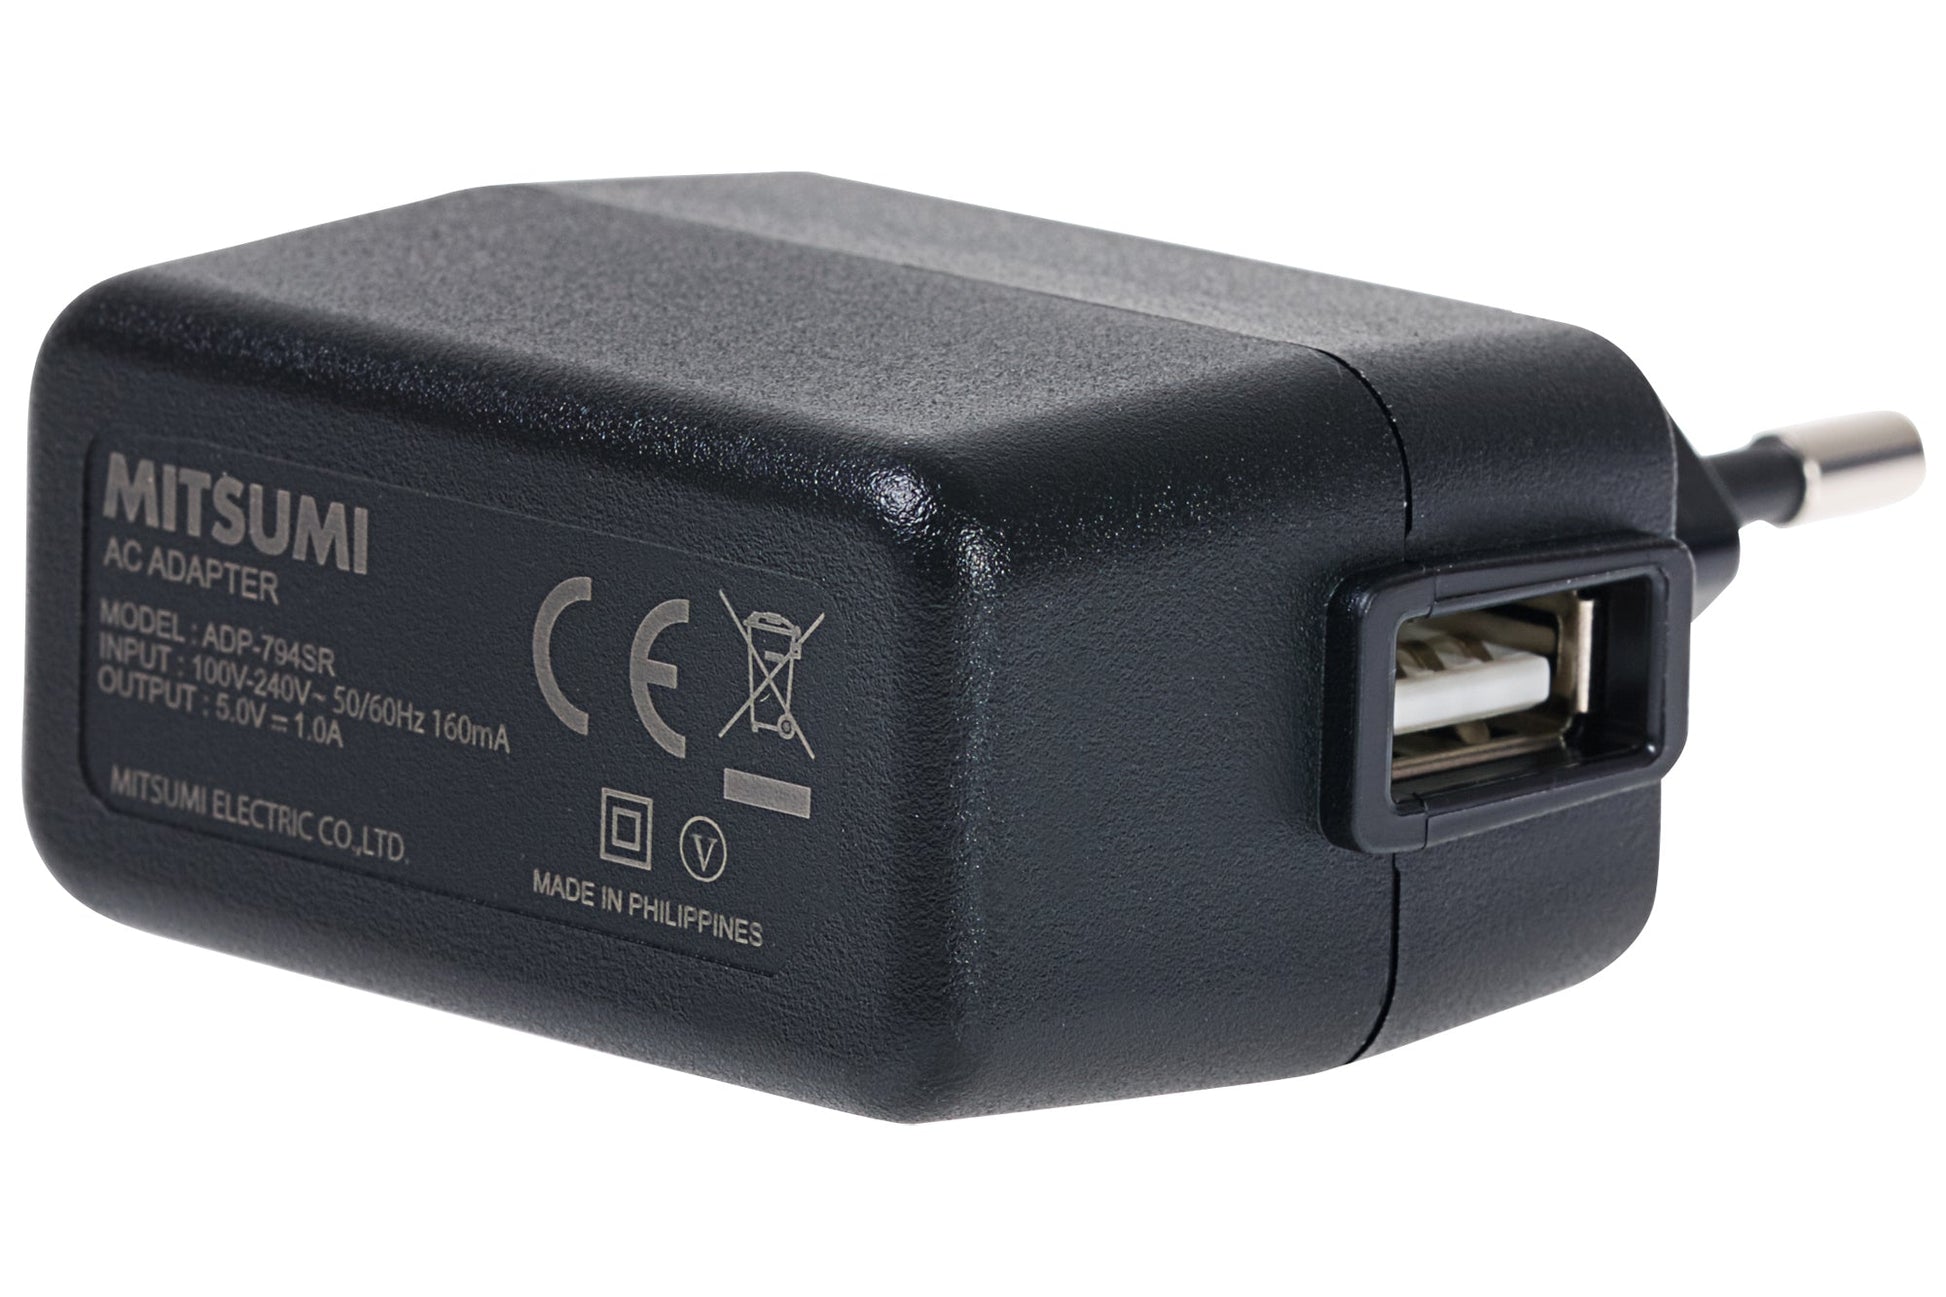 Maplin 1-Port USB-A 5V EU Wall Charger 5V 1 Amp 100-240V Travel Adapte, Chargers & Adapters, Maplin